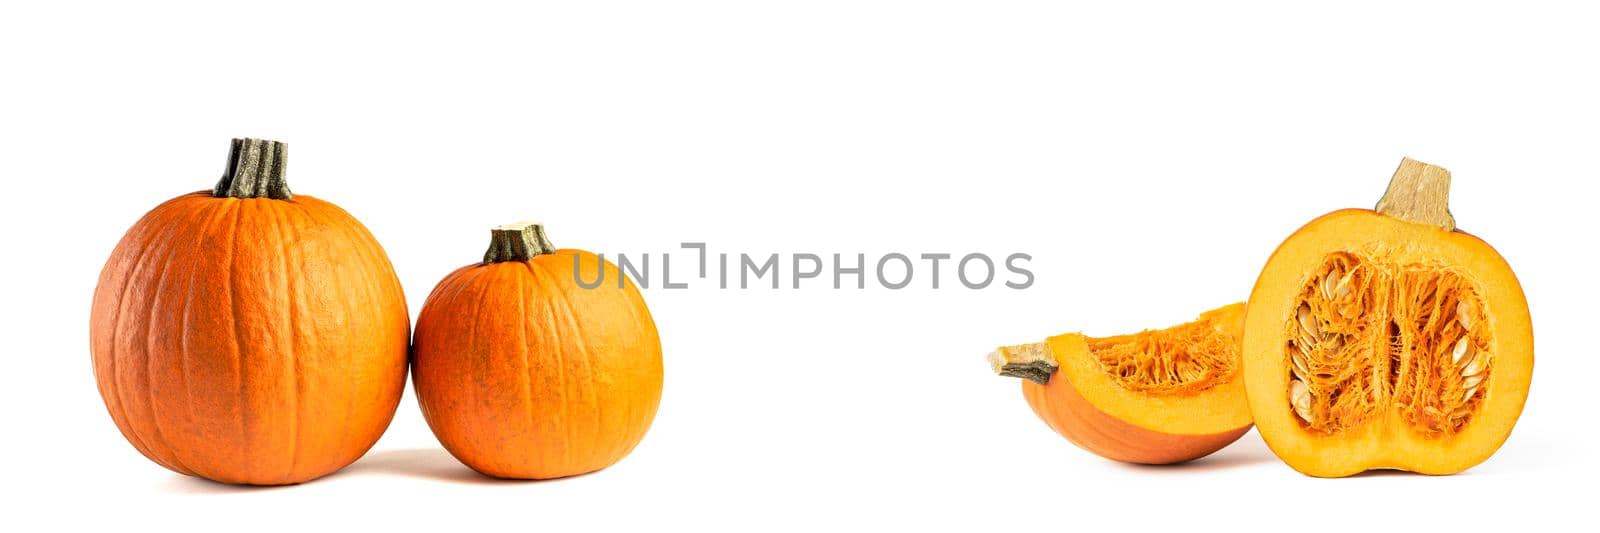 Pumpkin on a white background. Halloween theme. Highlight the pumpkin on white to insert into your project or design. Set of images, whole pumpkin and cut into pieces on white. Casts a shadow by SERSOL